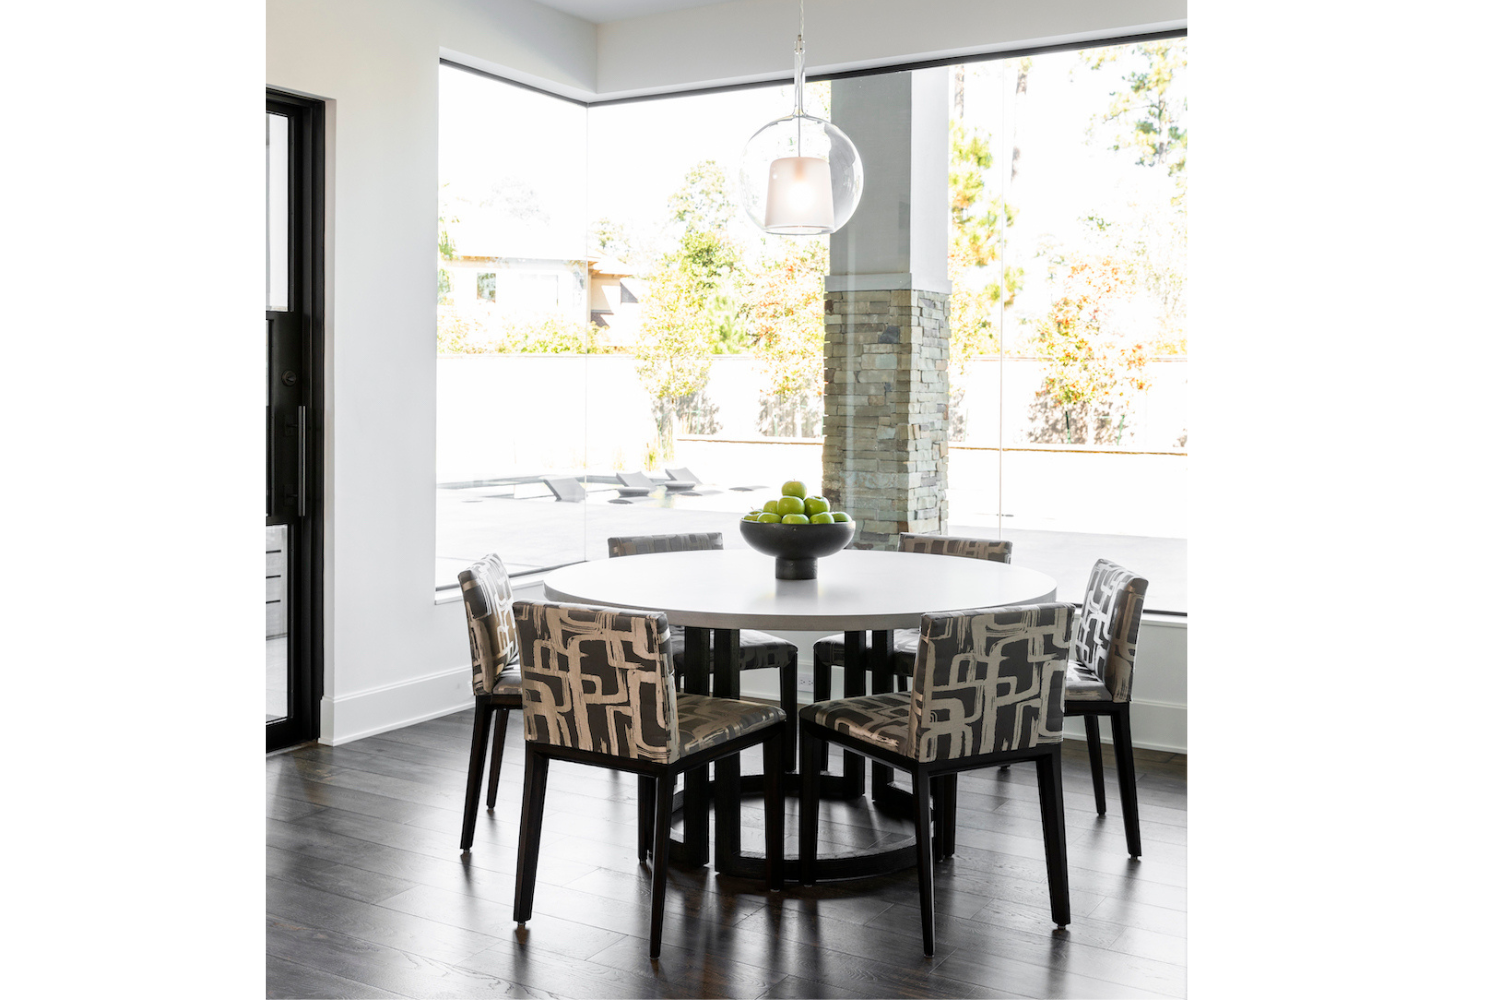 Kingwood Contemporary Casual Dining by Habitat Roche.png